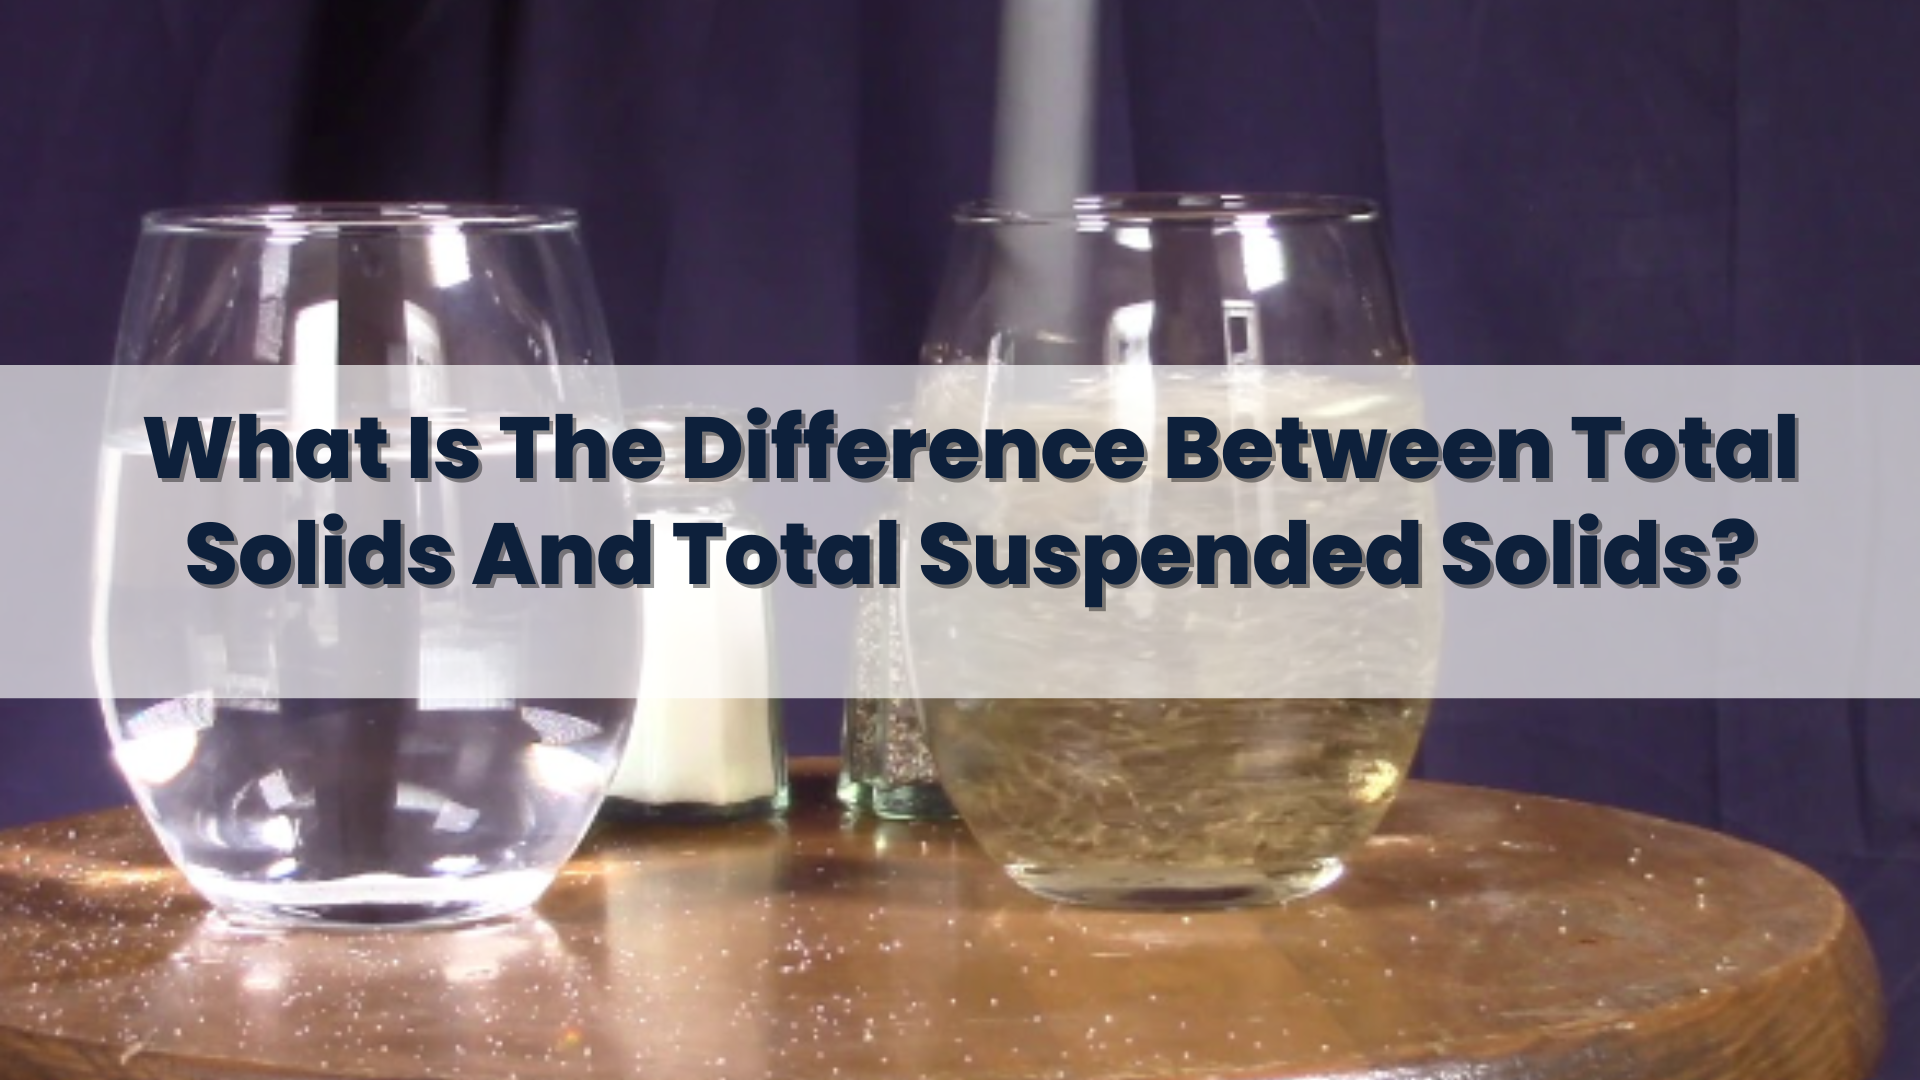 What Is The Difference Between Total Solids And Total Suspended Solids